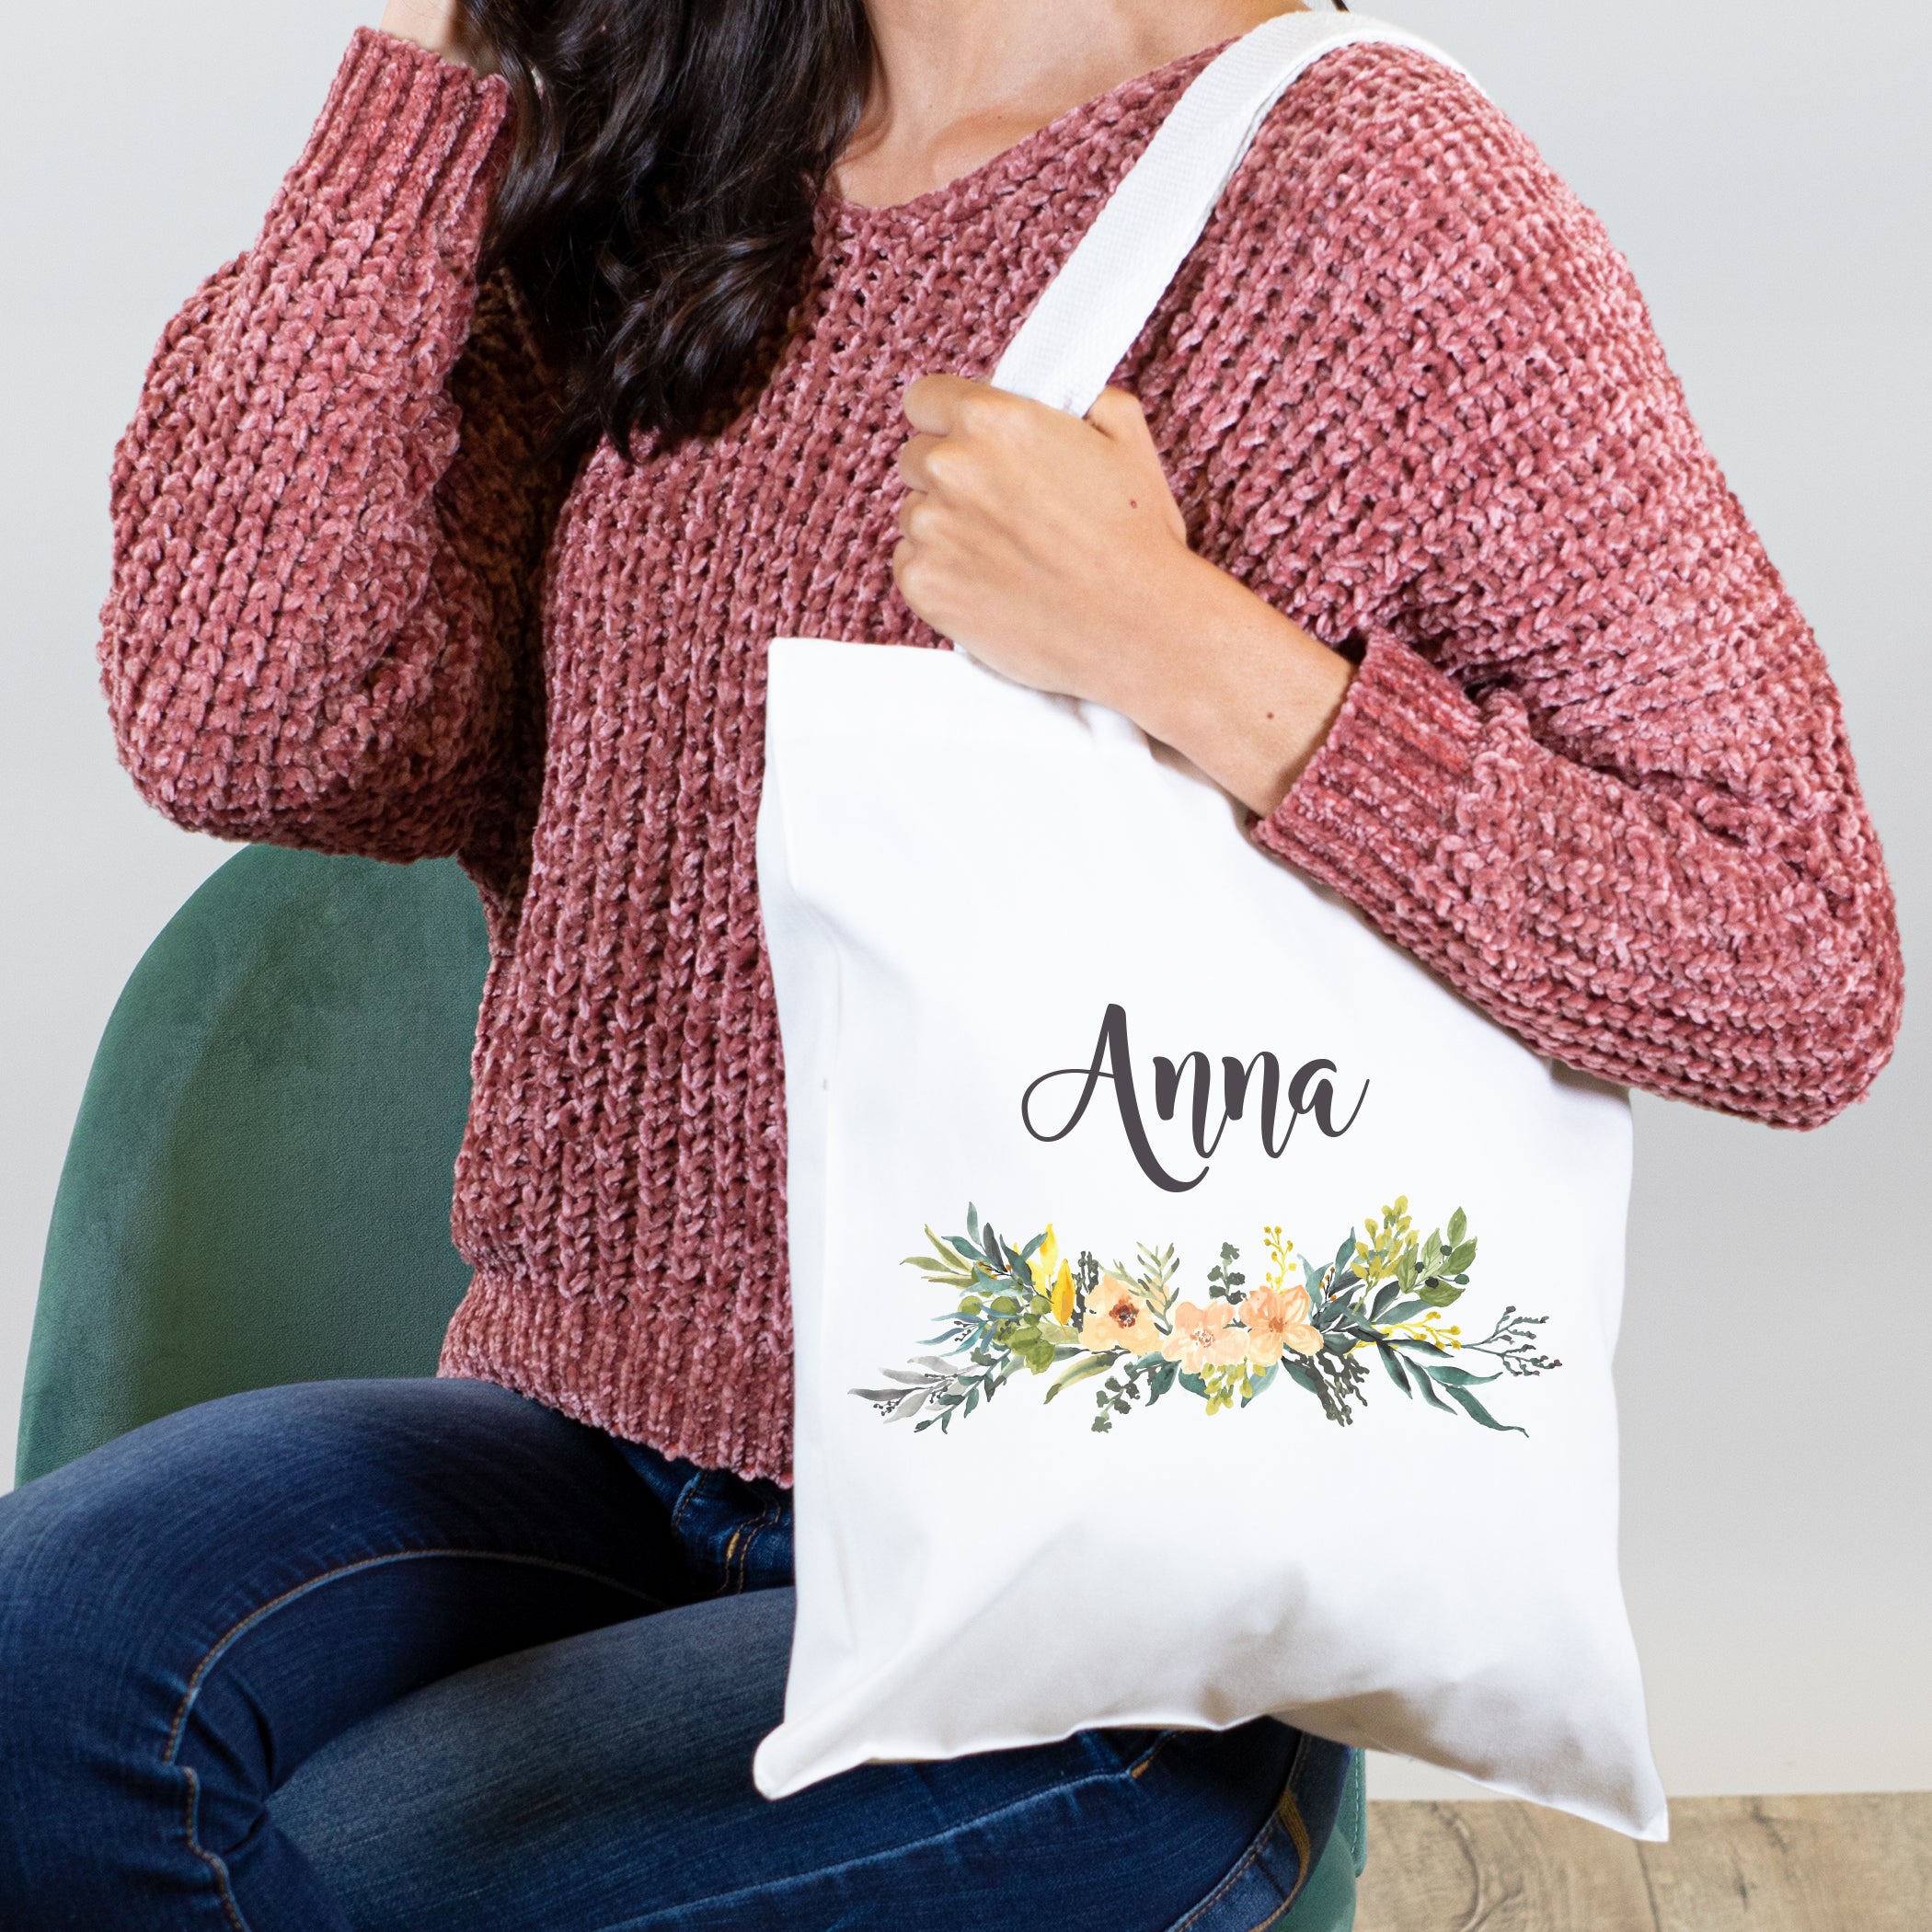 Floral Name Design, Personalized Tote Bag – Initial Outfitters